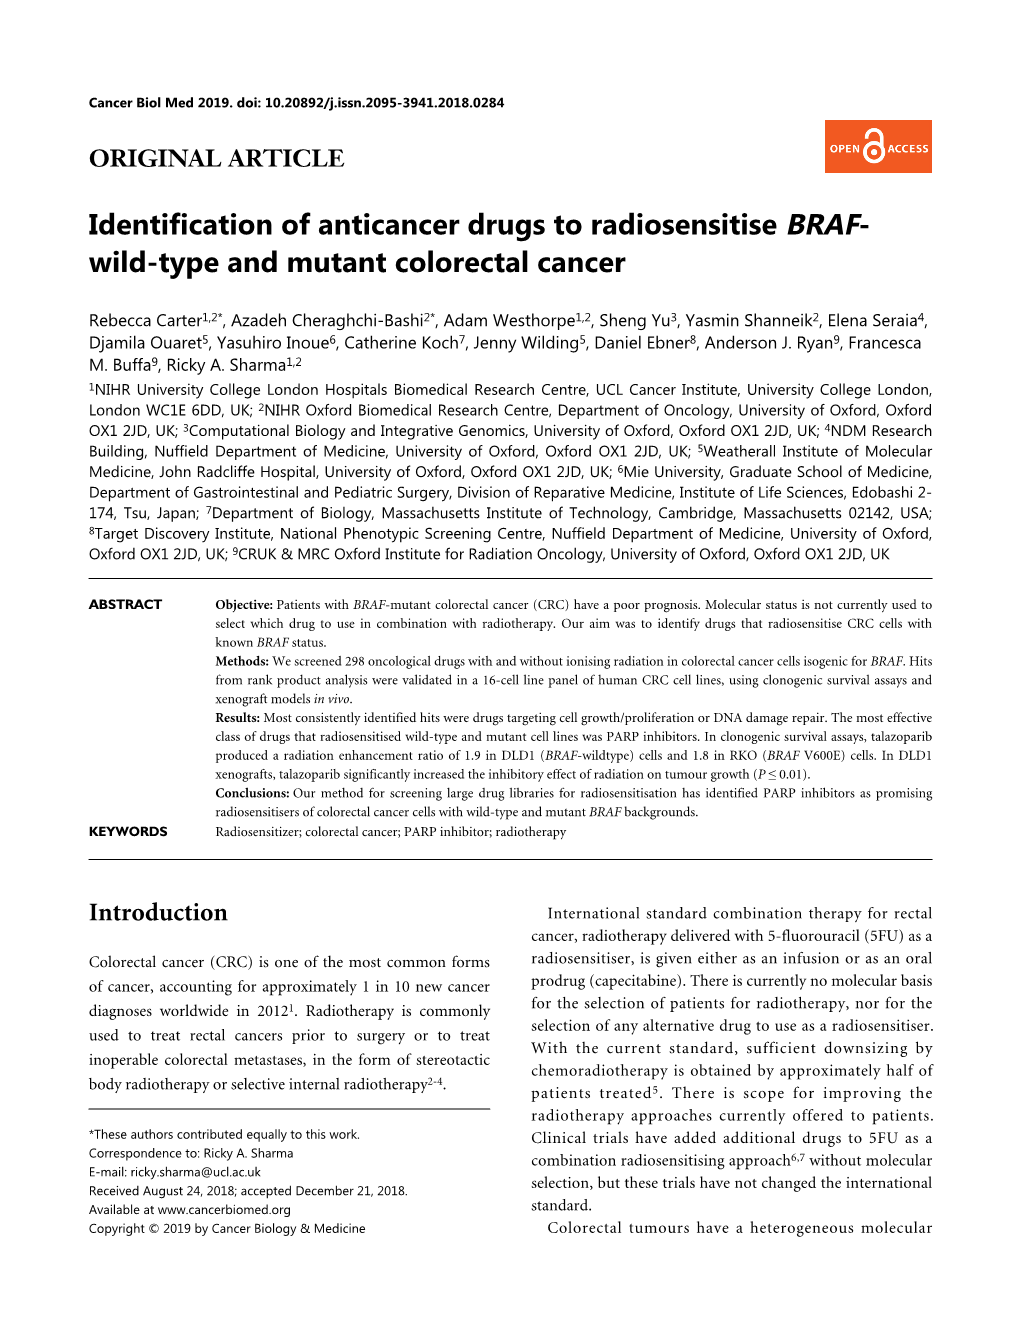 Identification of Anticancer Drugs to Radiosensitise BRAF- Wild-Type and Mutant Colorectal Cancer